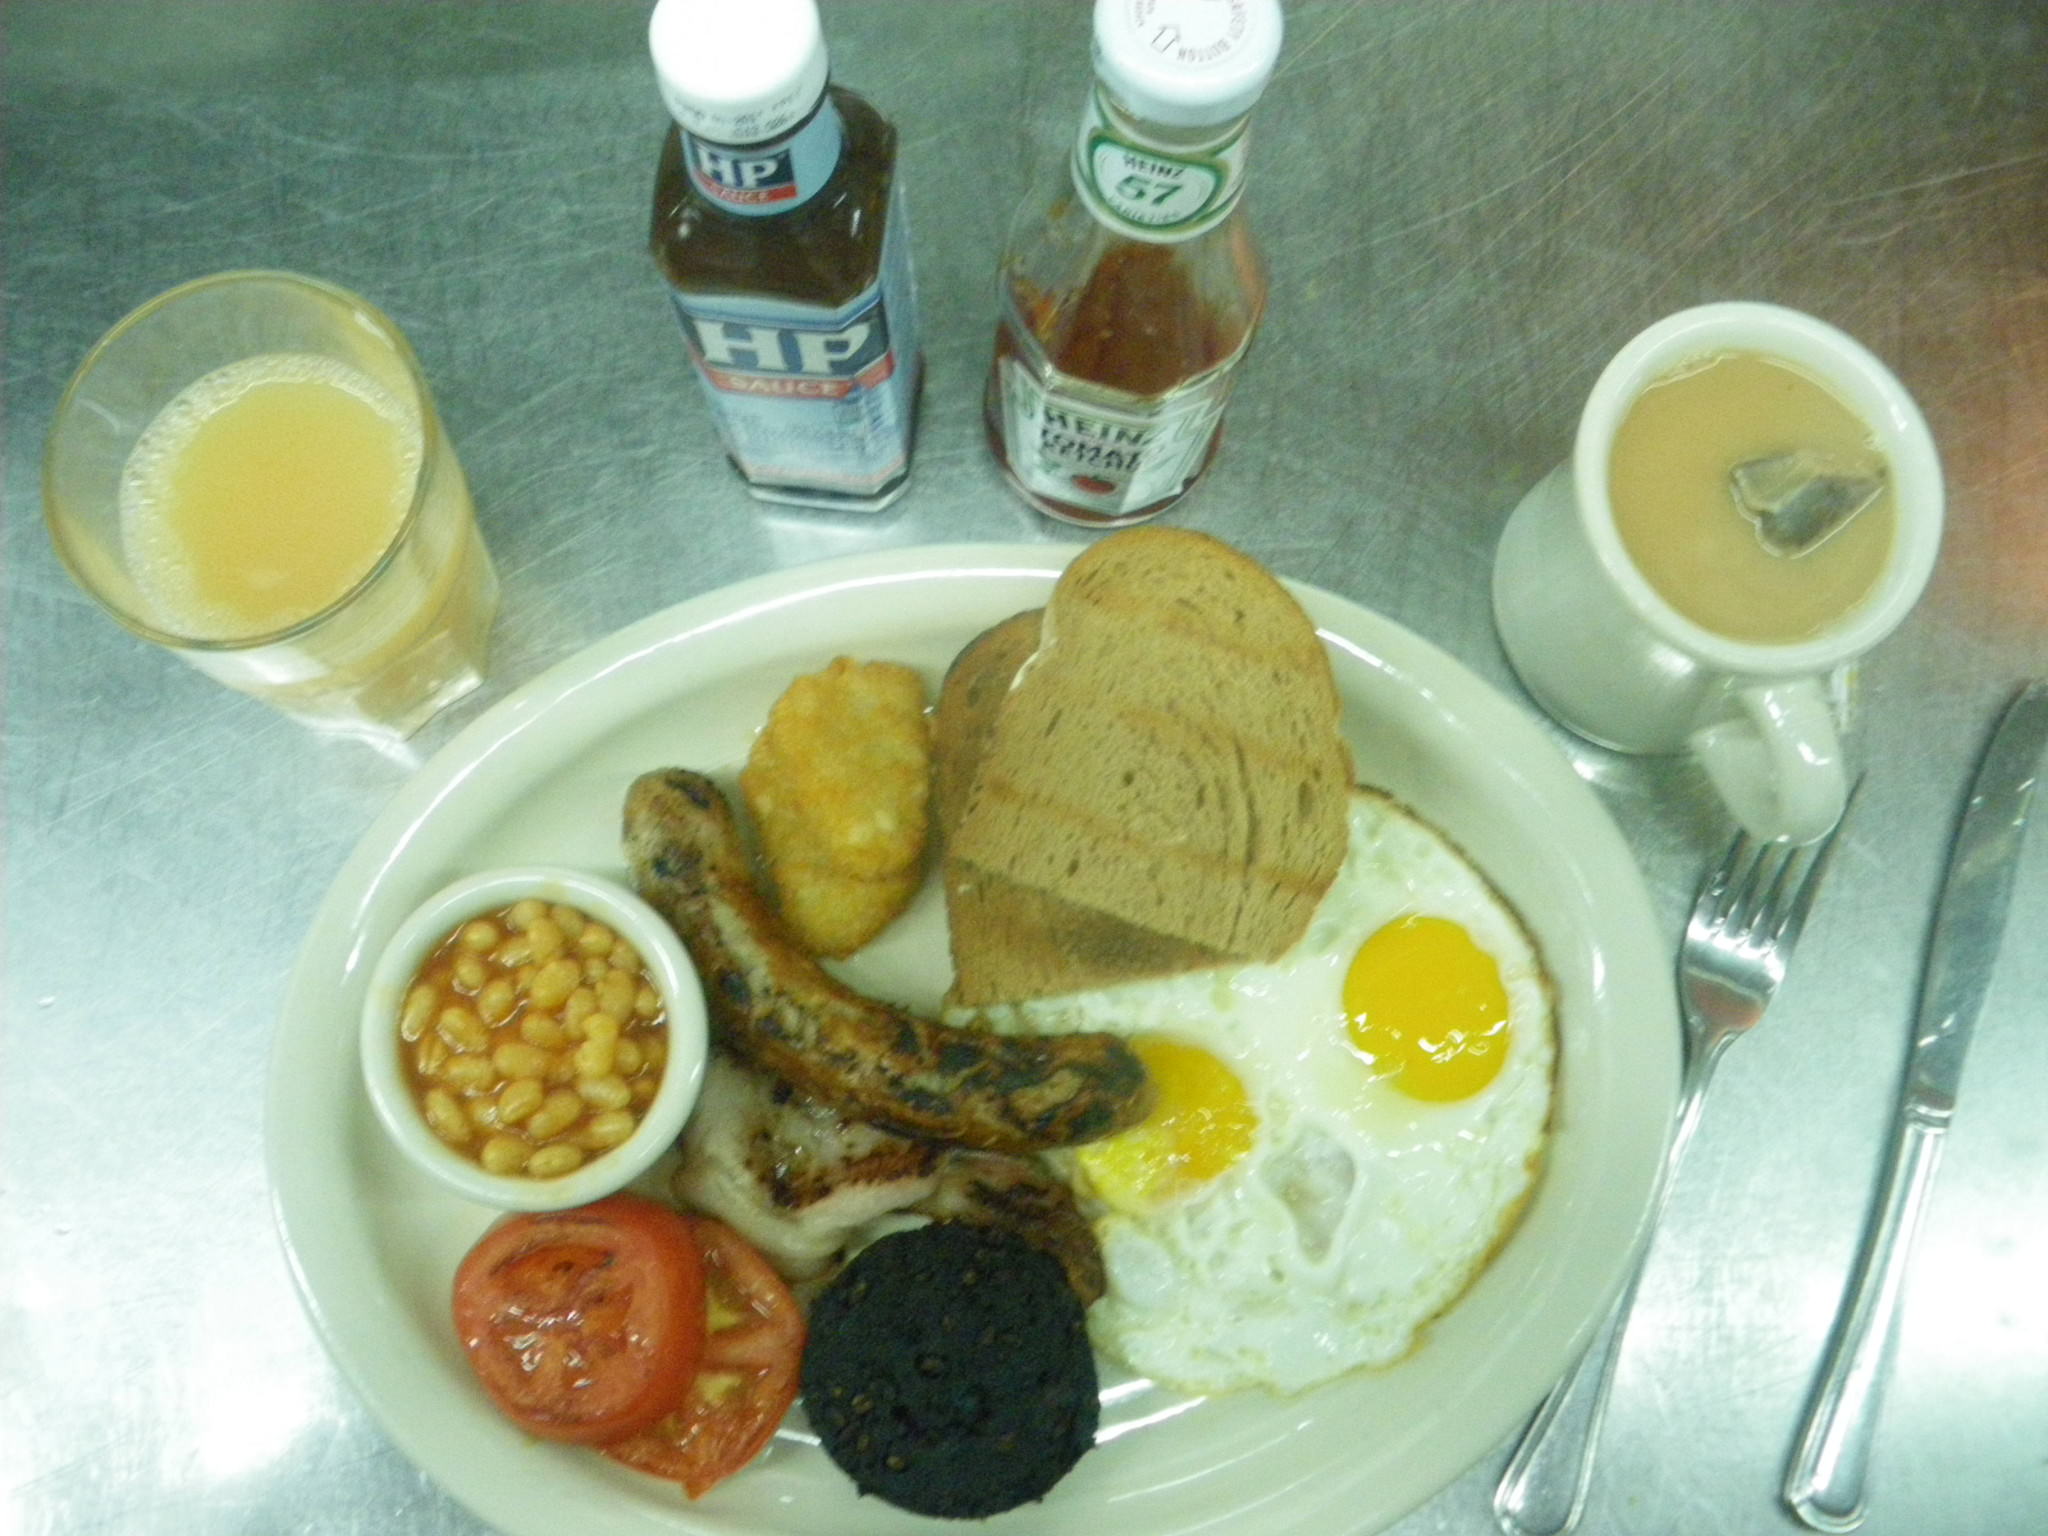 Take advantage of free breakfasts in hostels on your travels